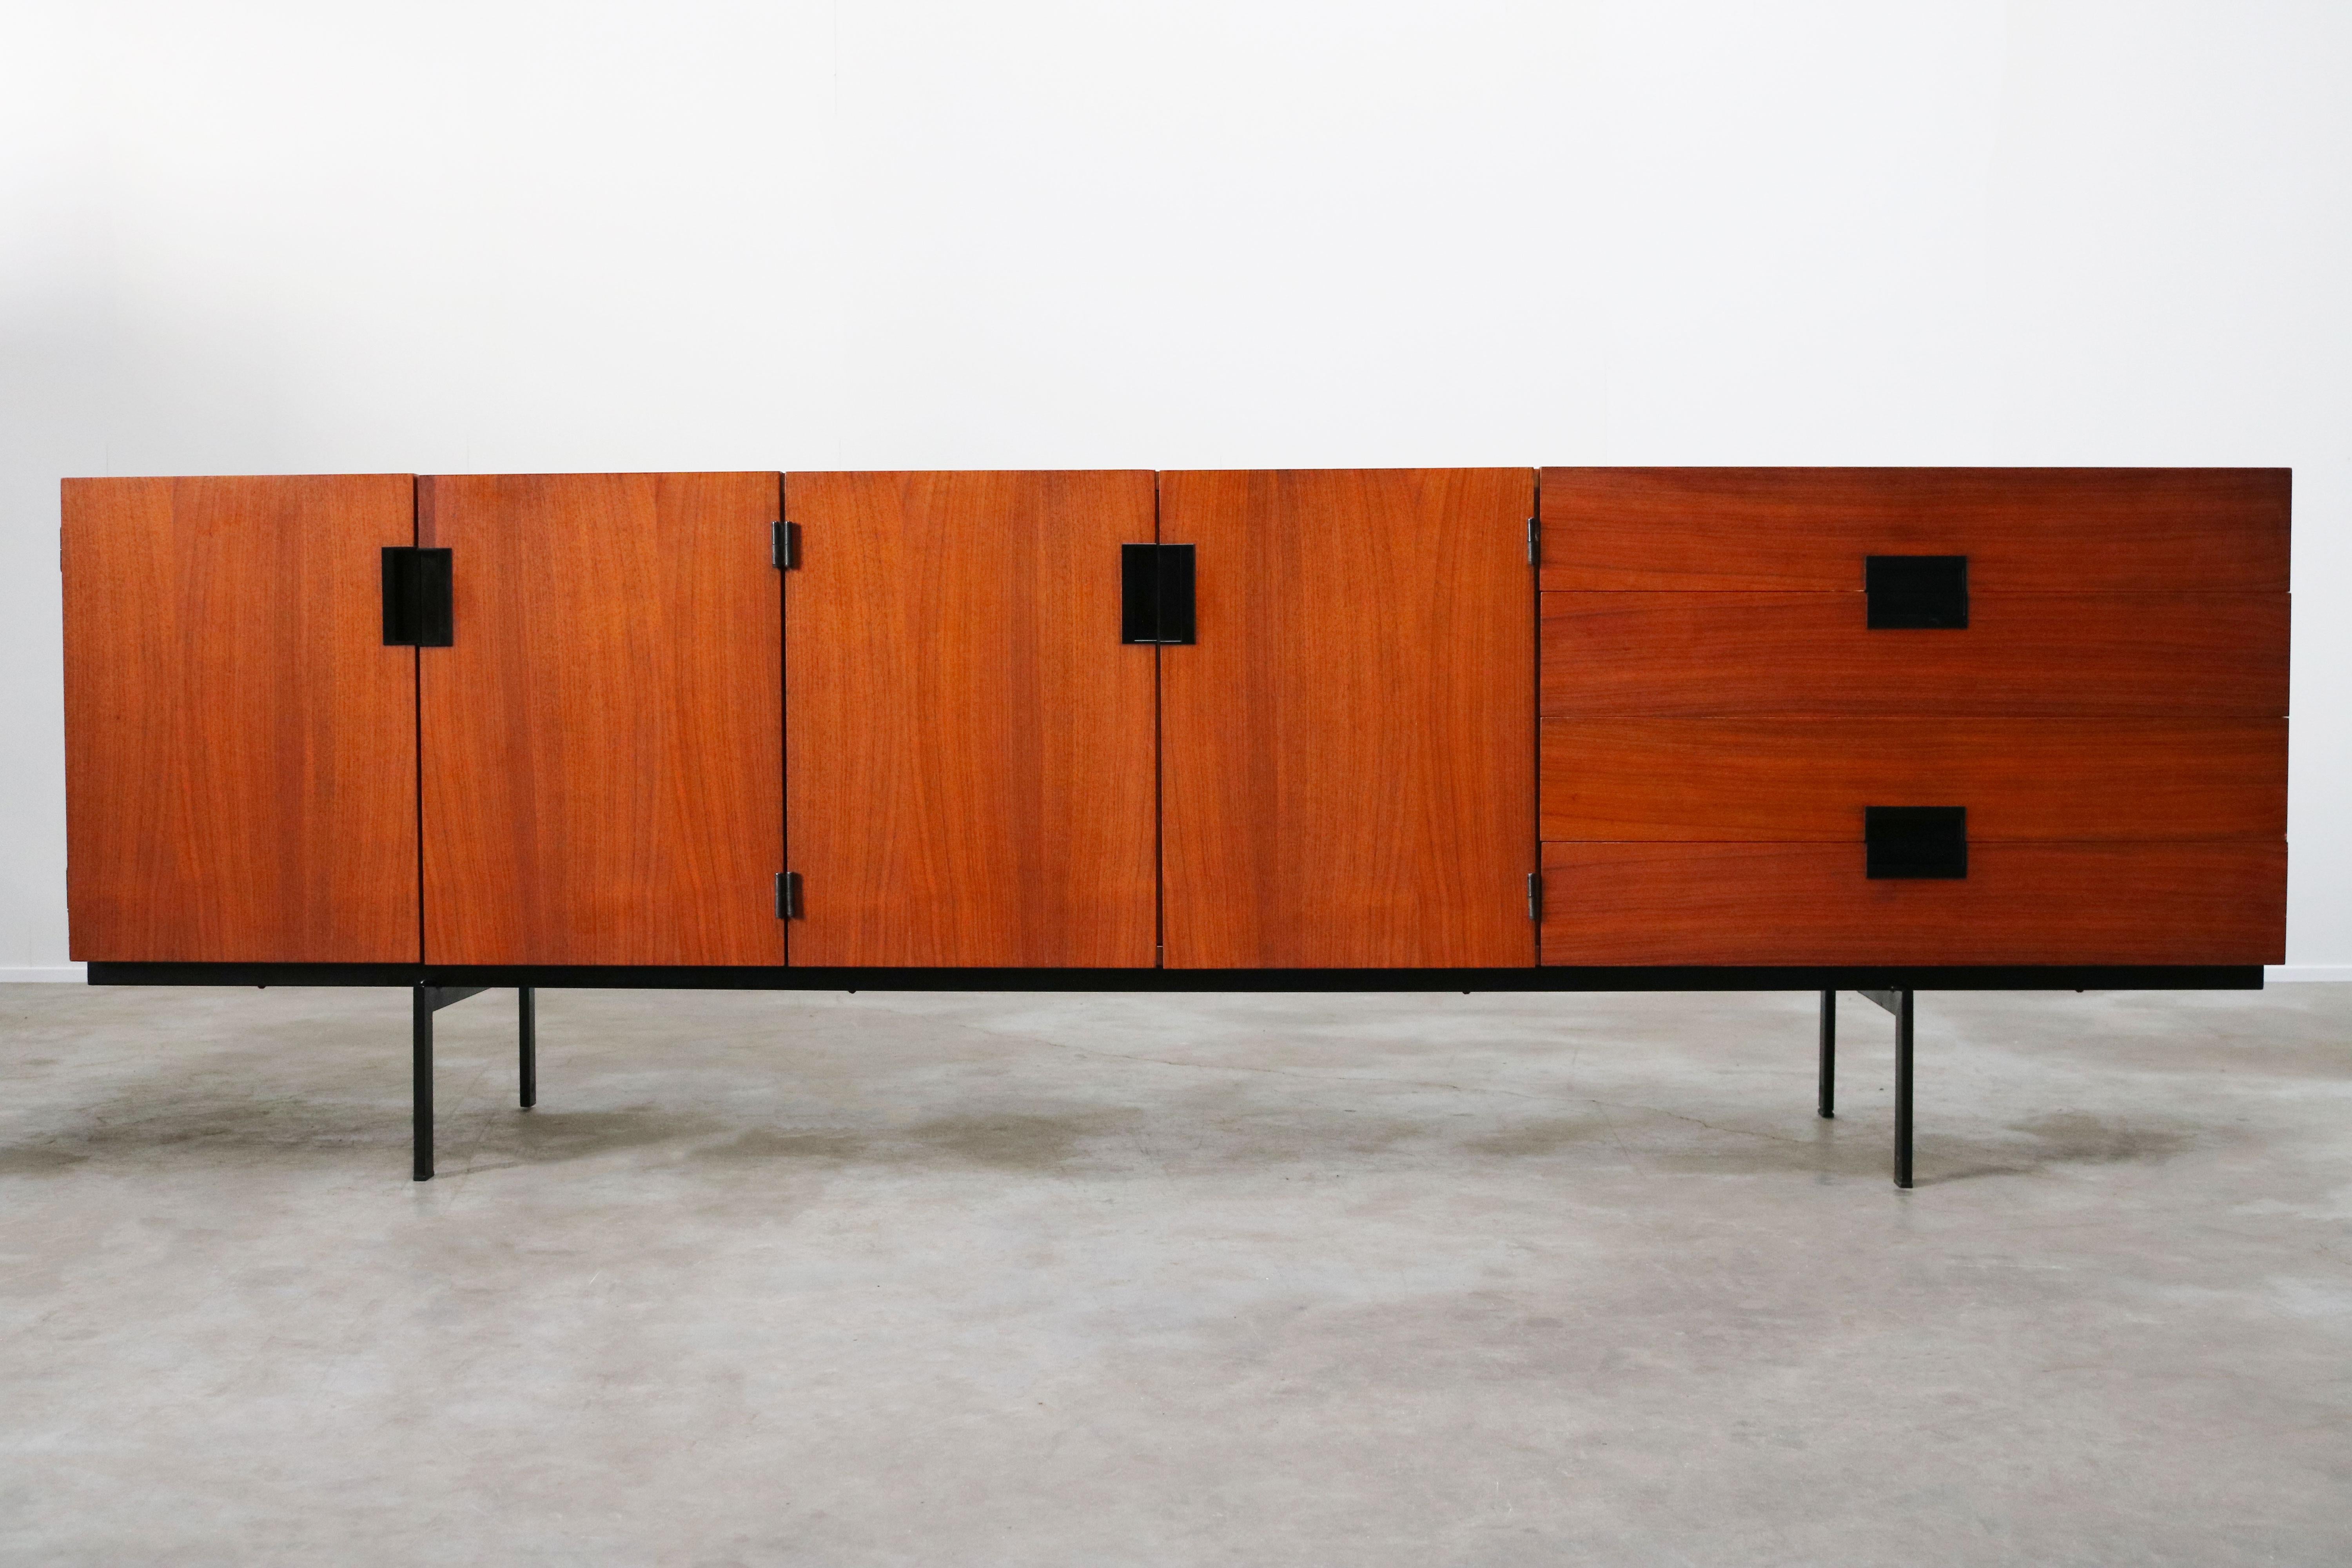 Magnificent fully original Dutch design sideboard or credenza Model: DU-03 by Cees Braakman for Pastoe 1954. The world famous design from Cees Braakman his DU03 sideboard. Its clean and modern design in combination with its warm teak and black metal